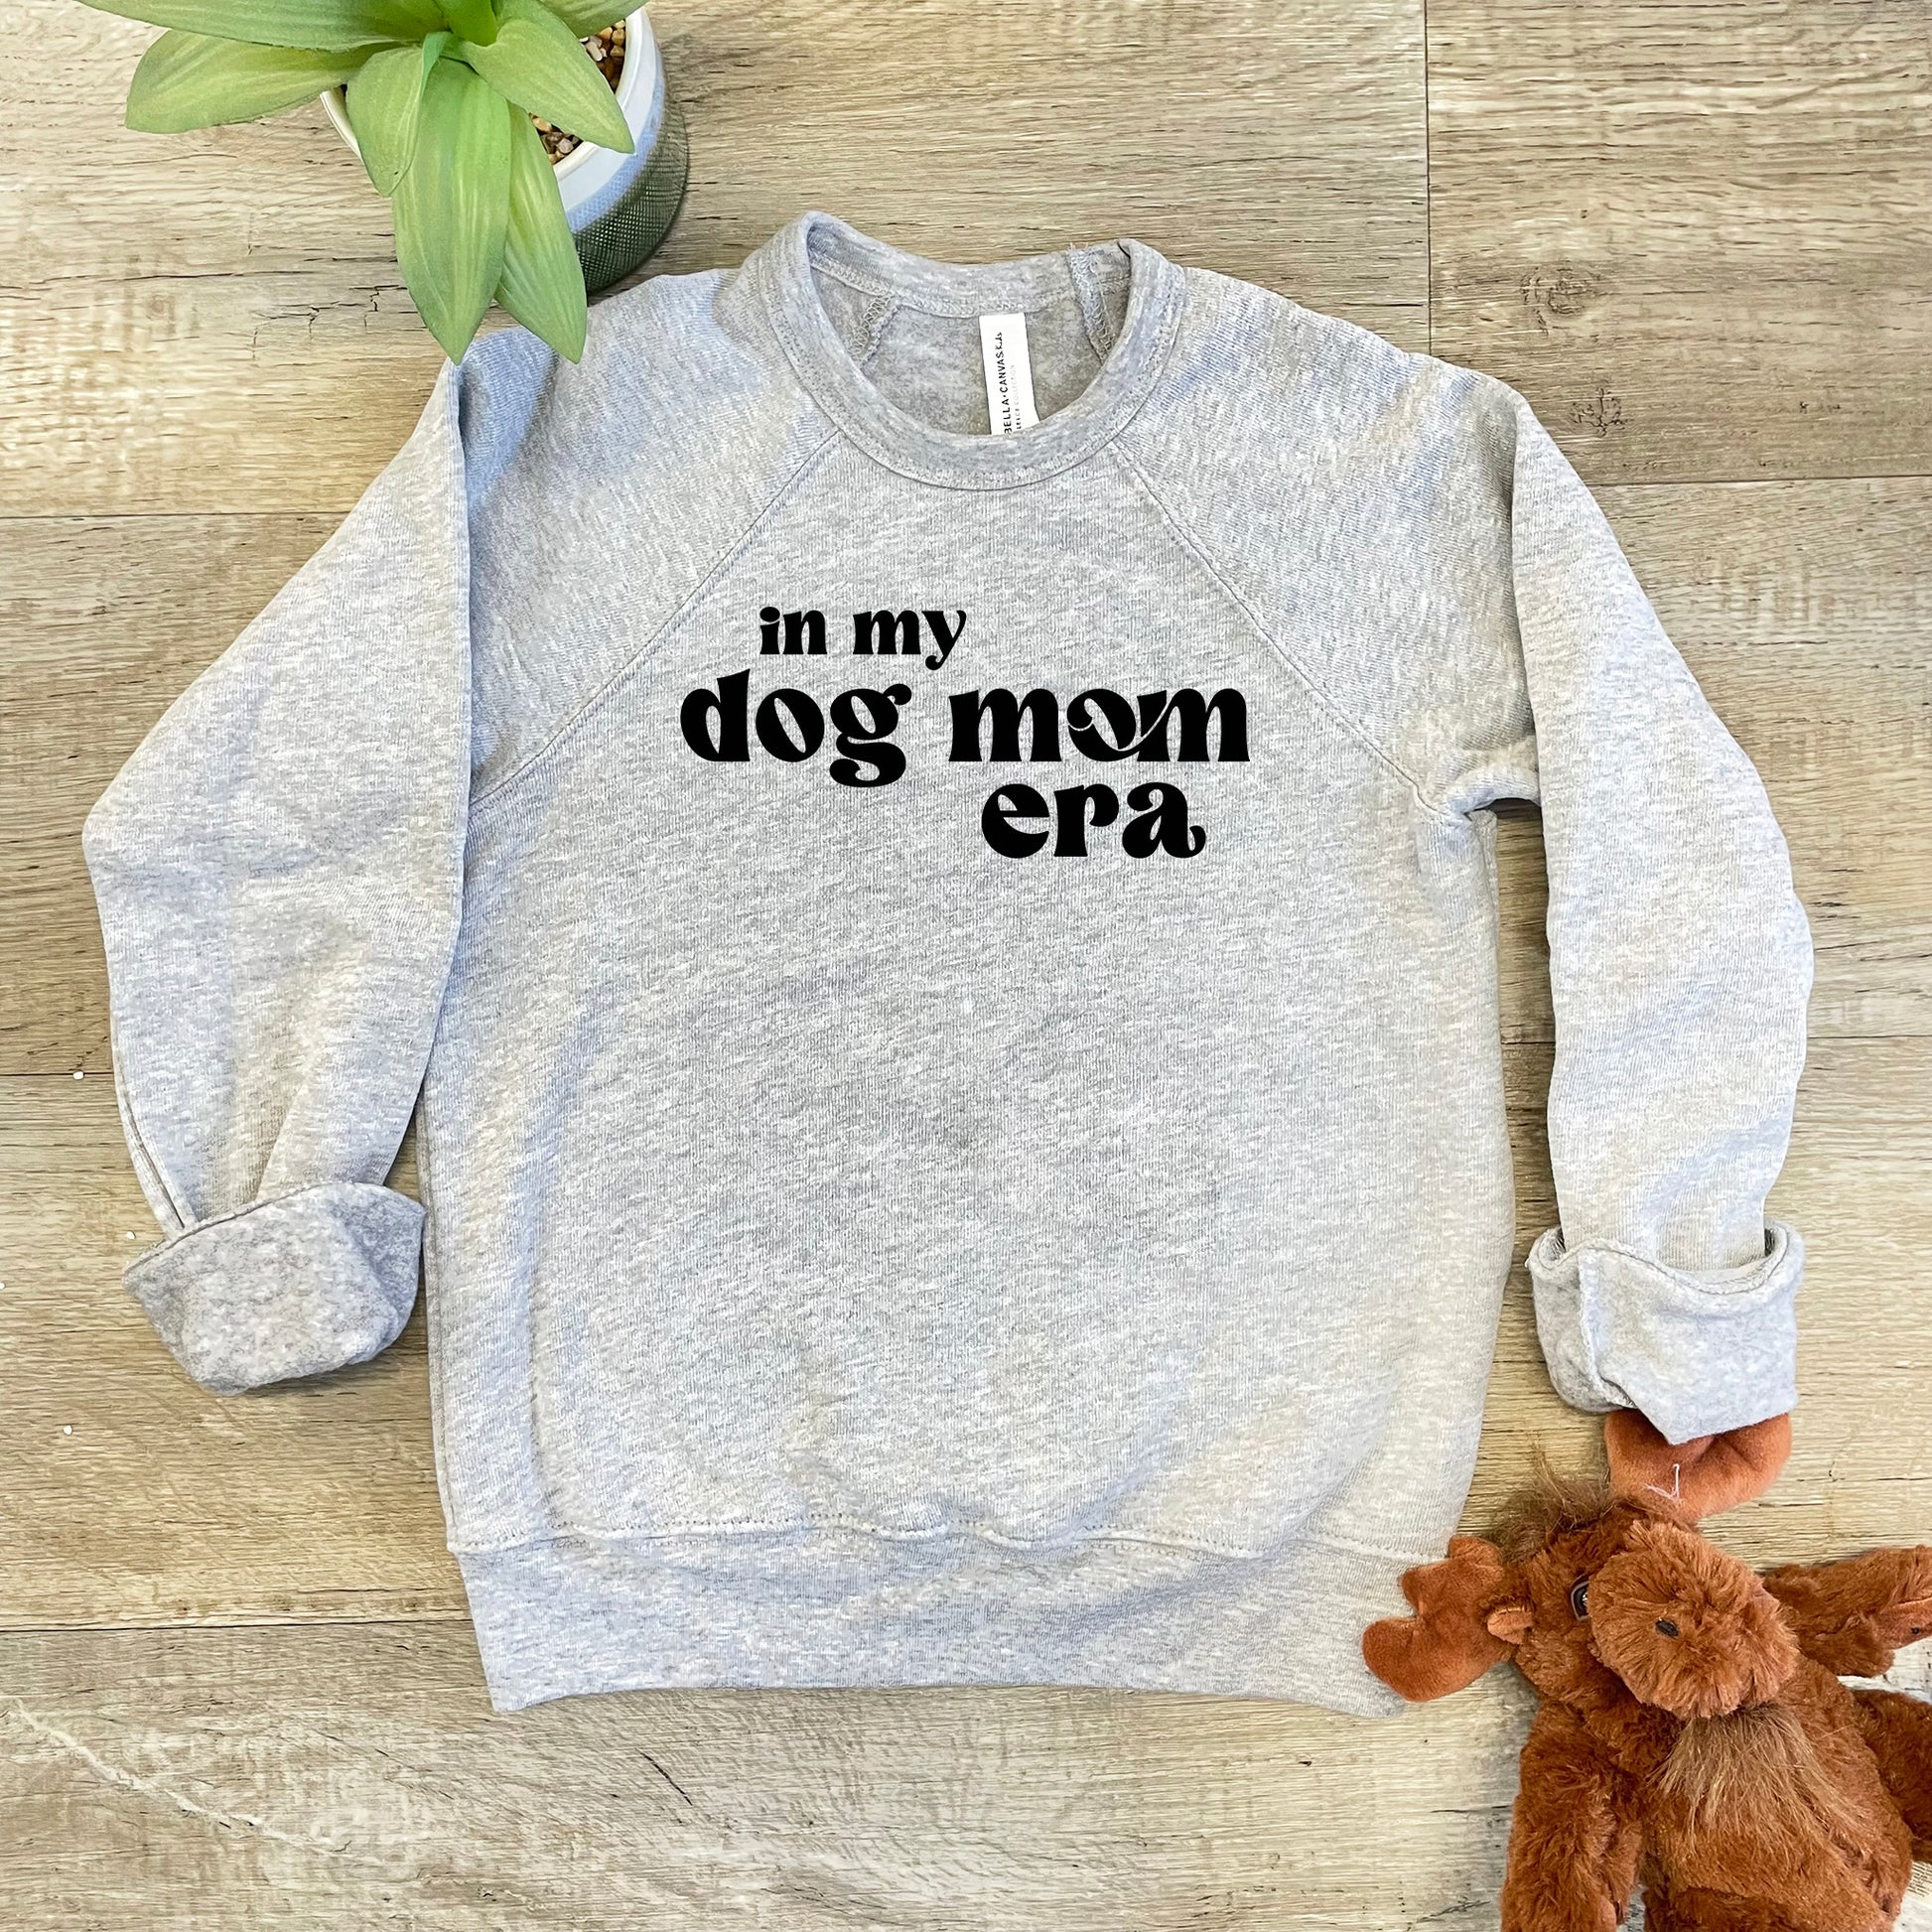 a gray sweatshirt with the words in my dog mom era on it next to a